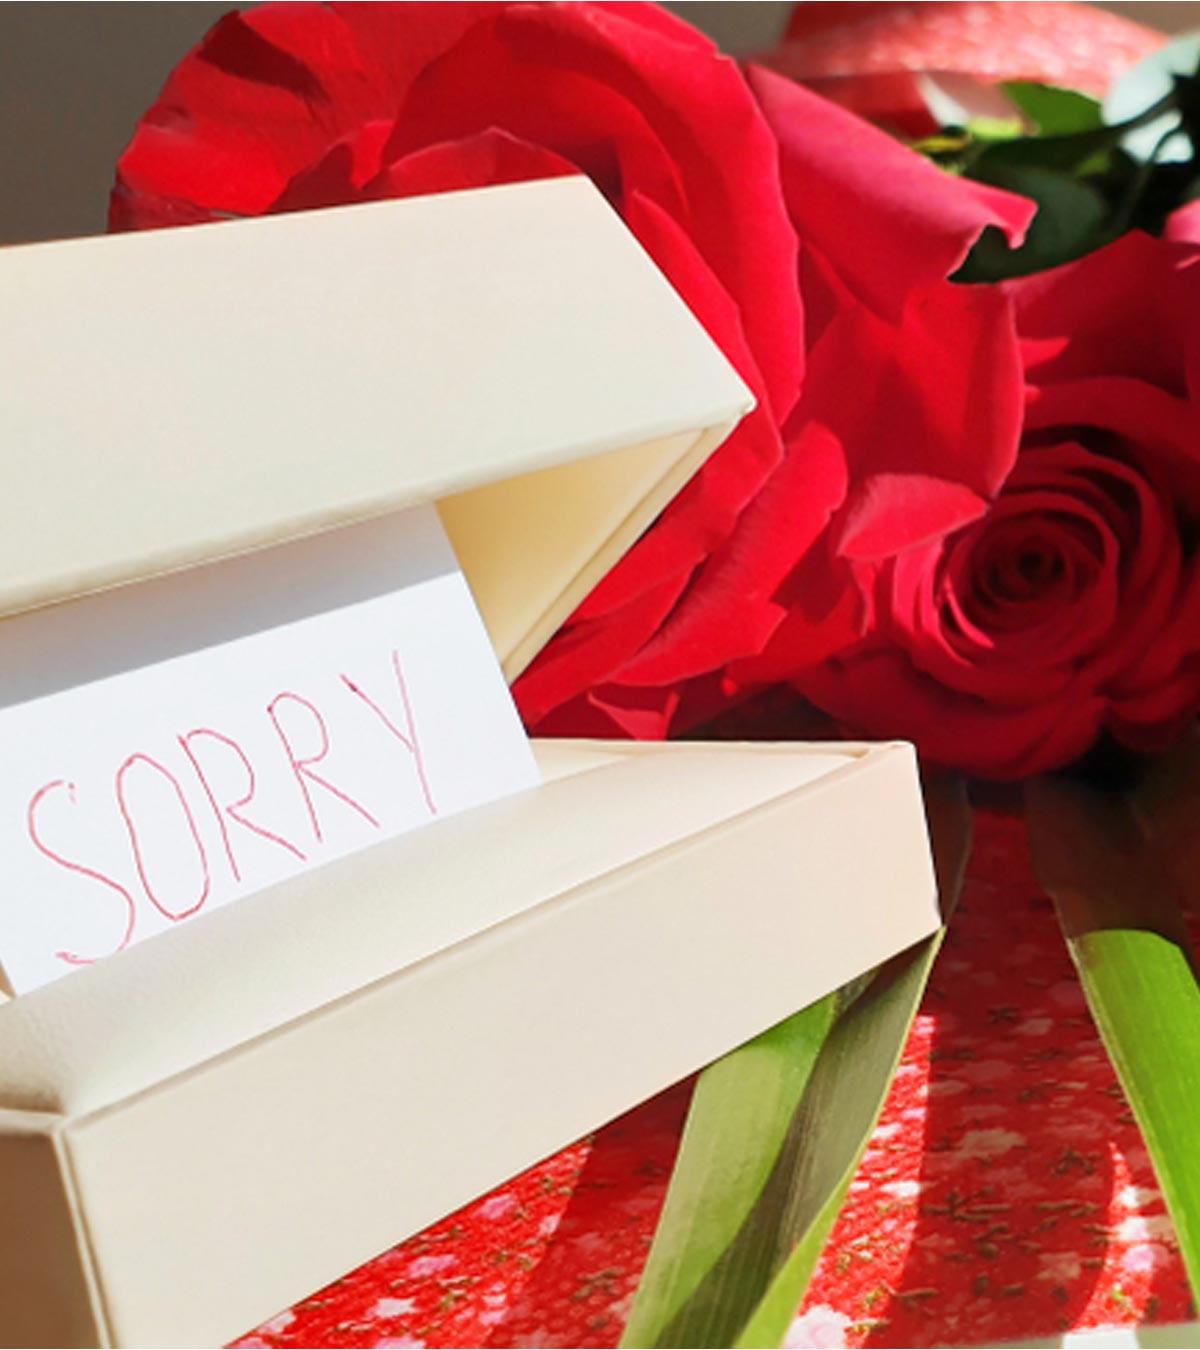 Sincere Sorry Messages And Quotes For Wife